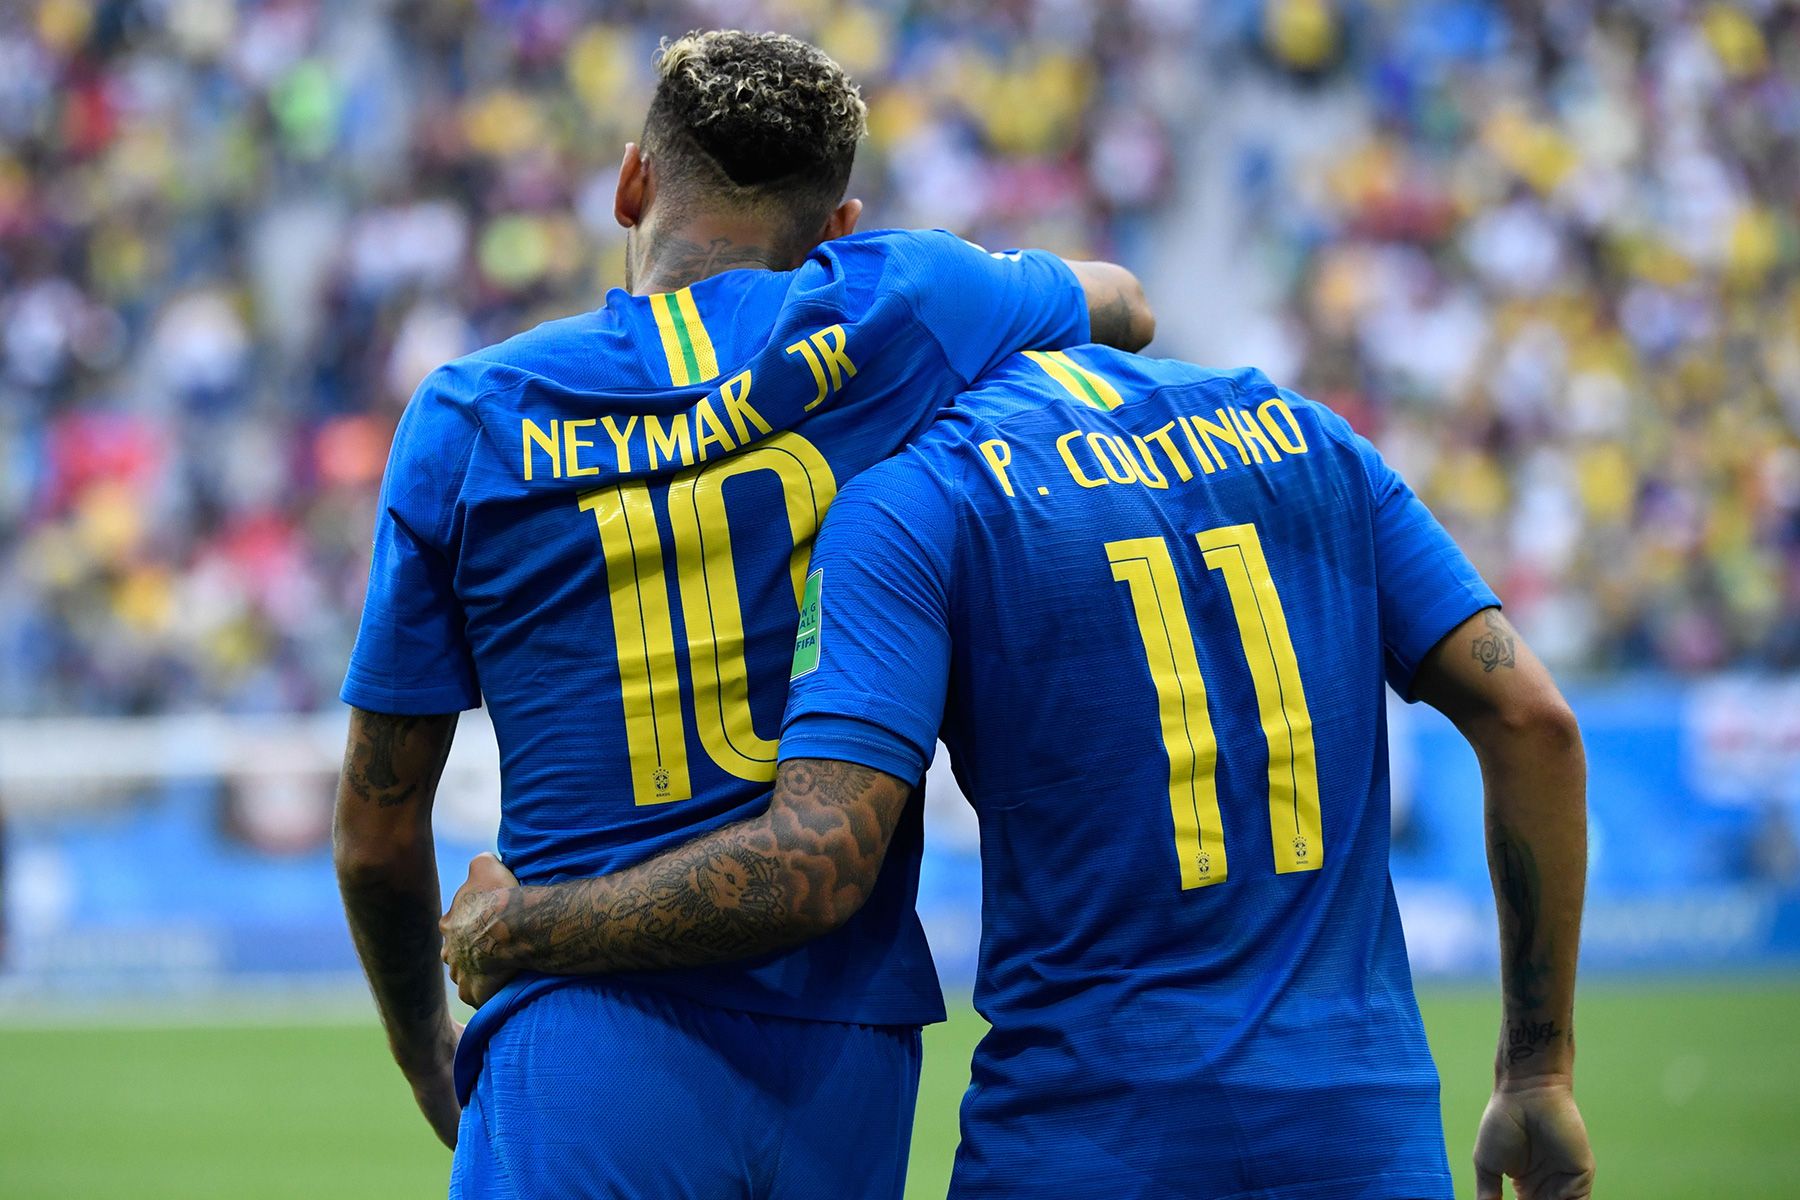 Neymar and Coutinho in a match of Brazil